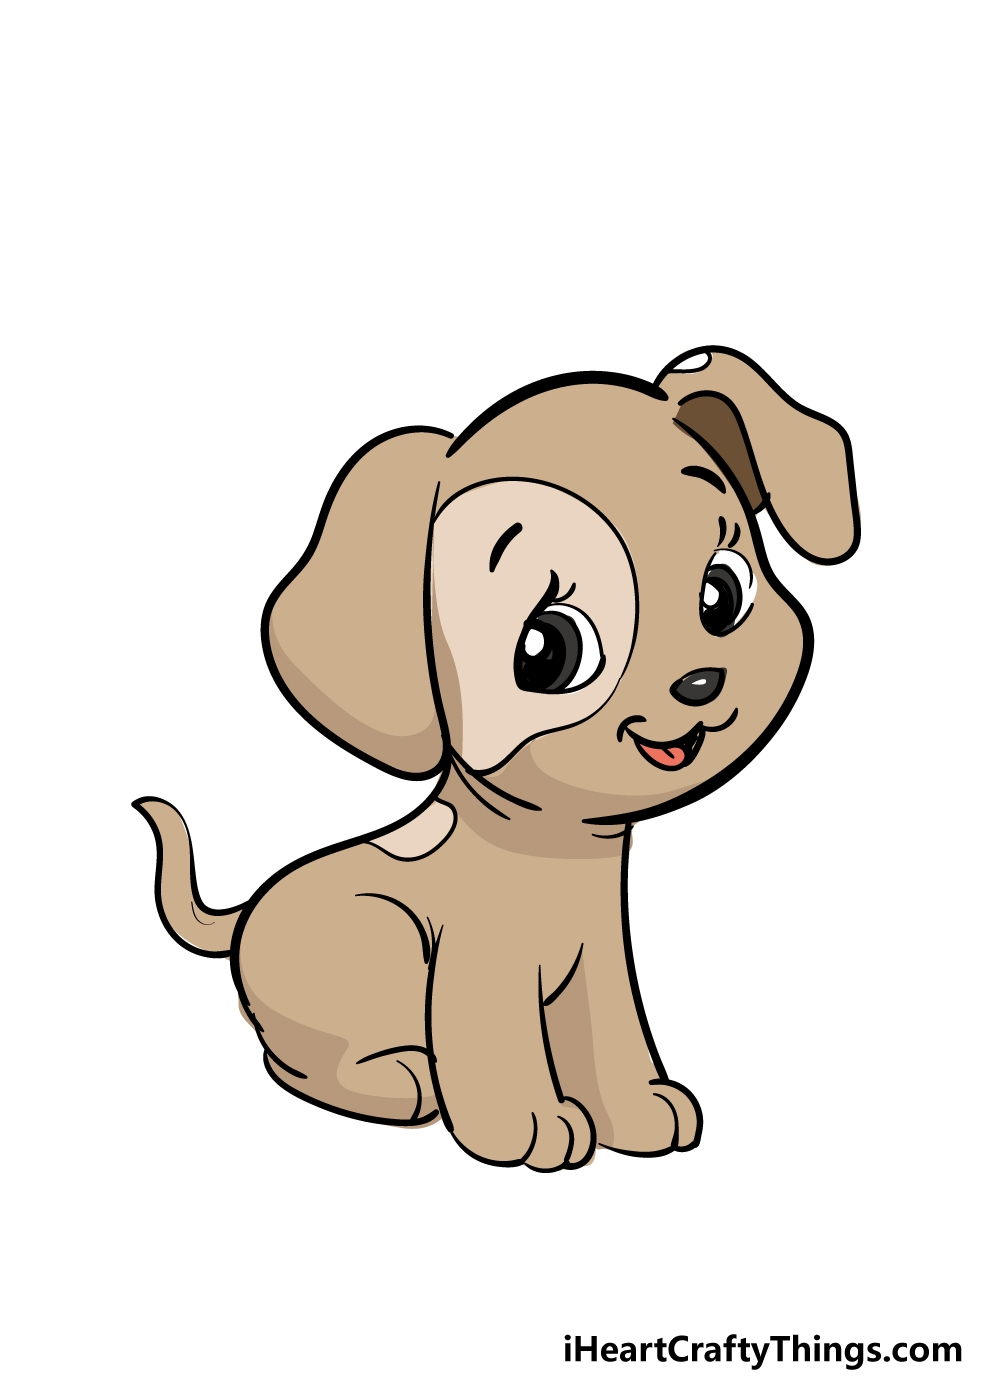 Cute Puppy drawing